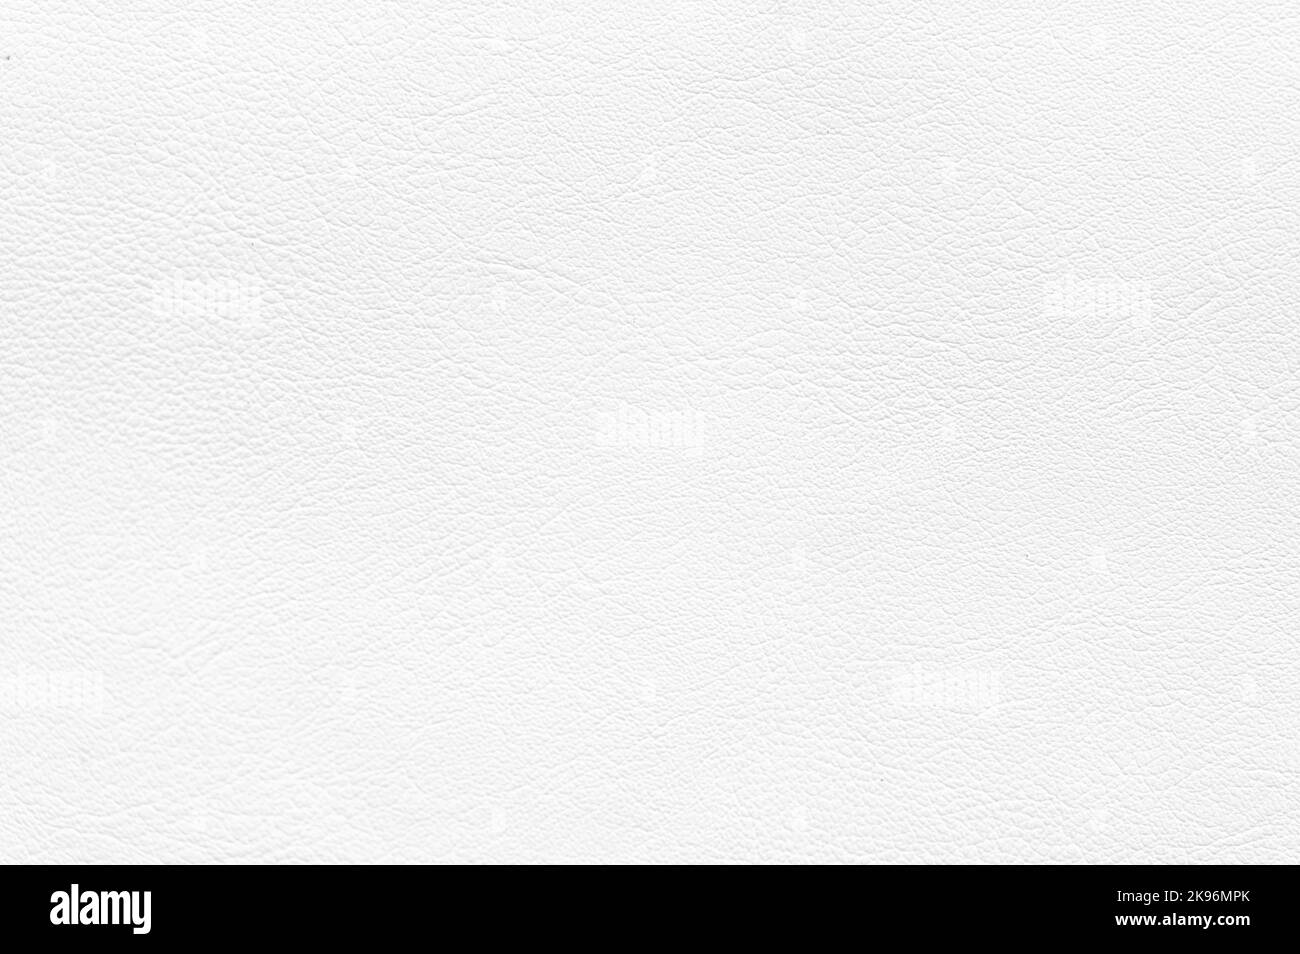 White grungeleather texture background High resolution background for design backdrop or texture overlay design Stock Photo